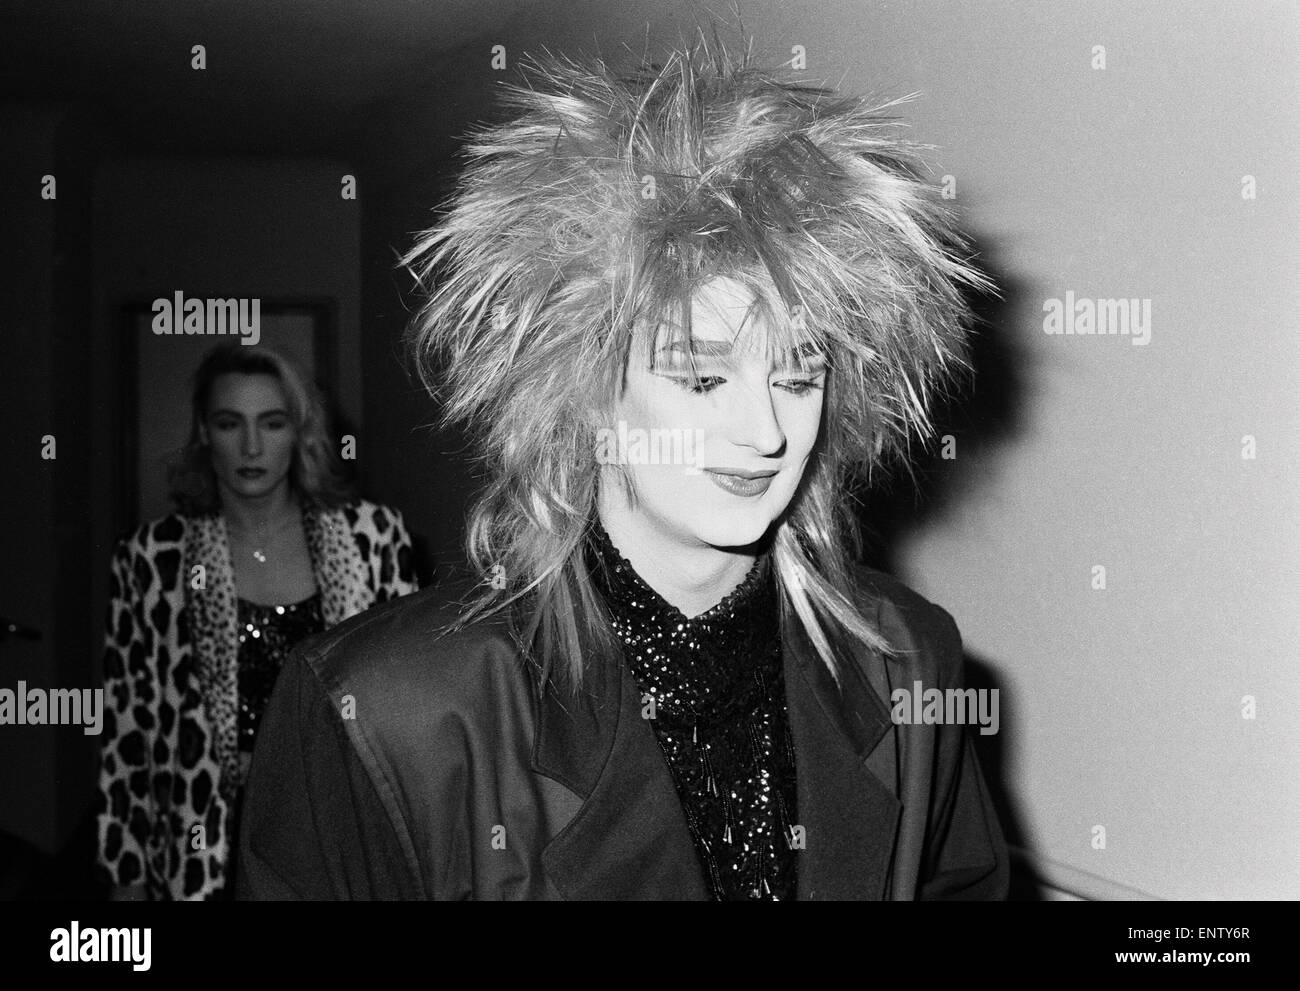 Culture Club singer Boy George arriving for the premiere of the film '1984'. Arriving 20 mins late accompanied by his friend Marilyn, he was sporing a vivid purple hairstyle. 7th October 1984. Stock Photo